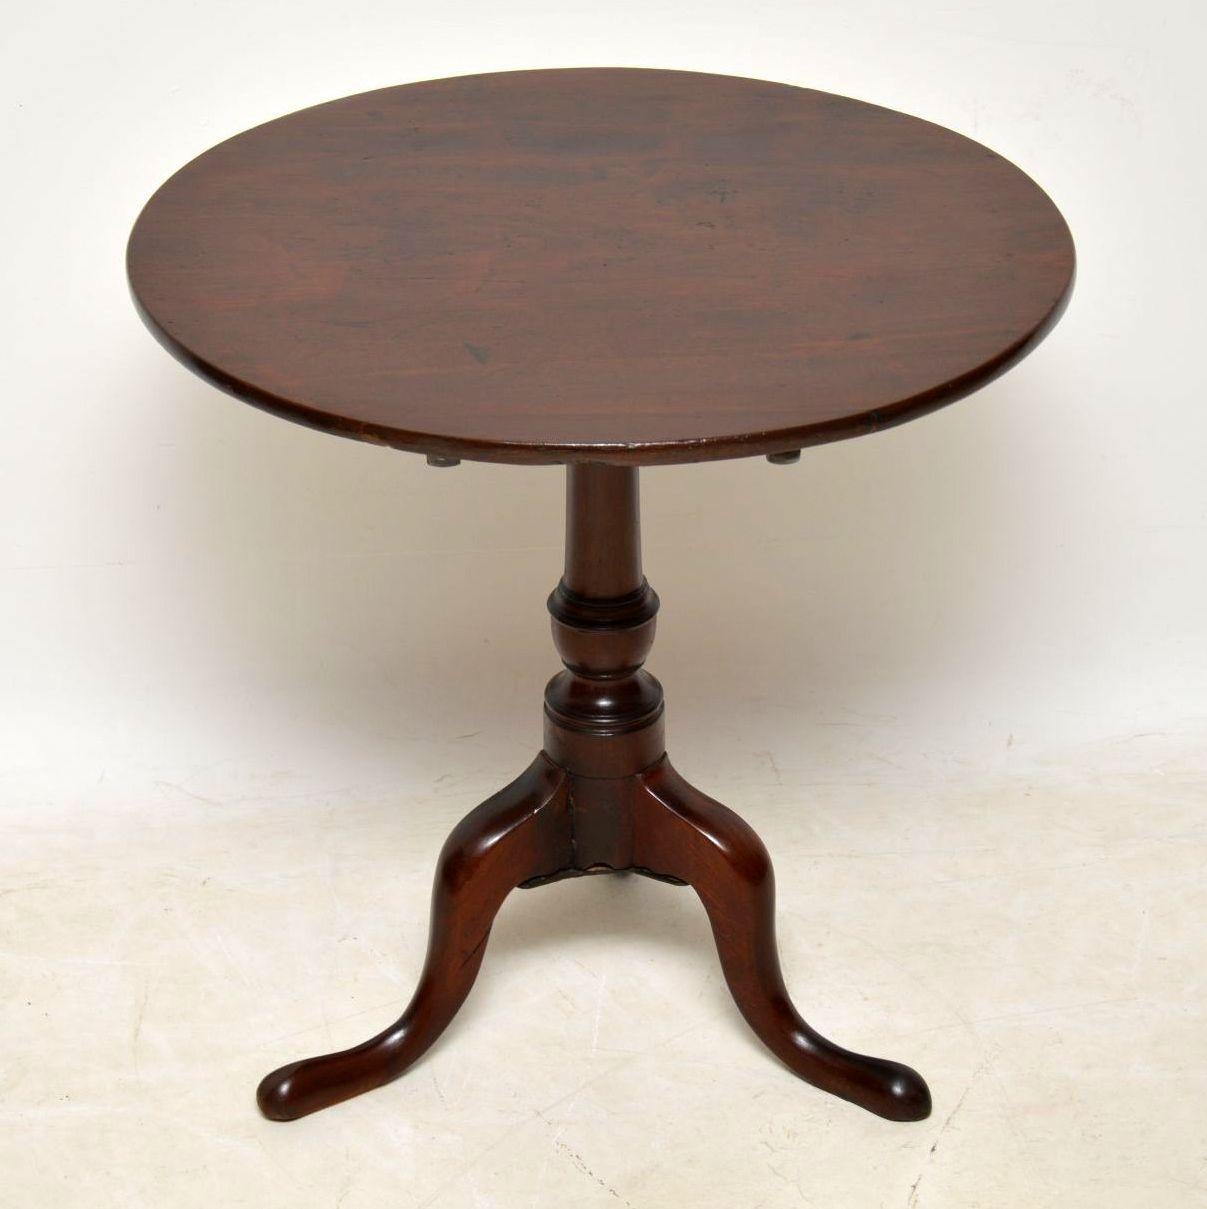 Antique George III solid mahogany period table in good condition and dating from circa 1790 period or possibly a bit earlier. This table has a tilt mechanism and as you can see from the images, it all looks original. It has good proportions and